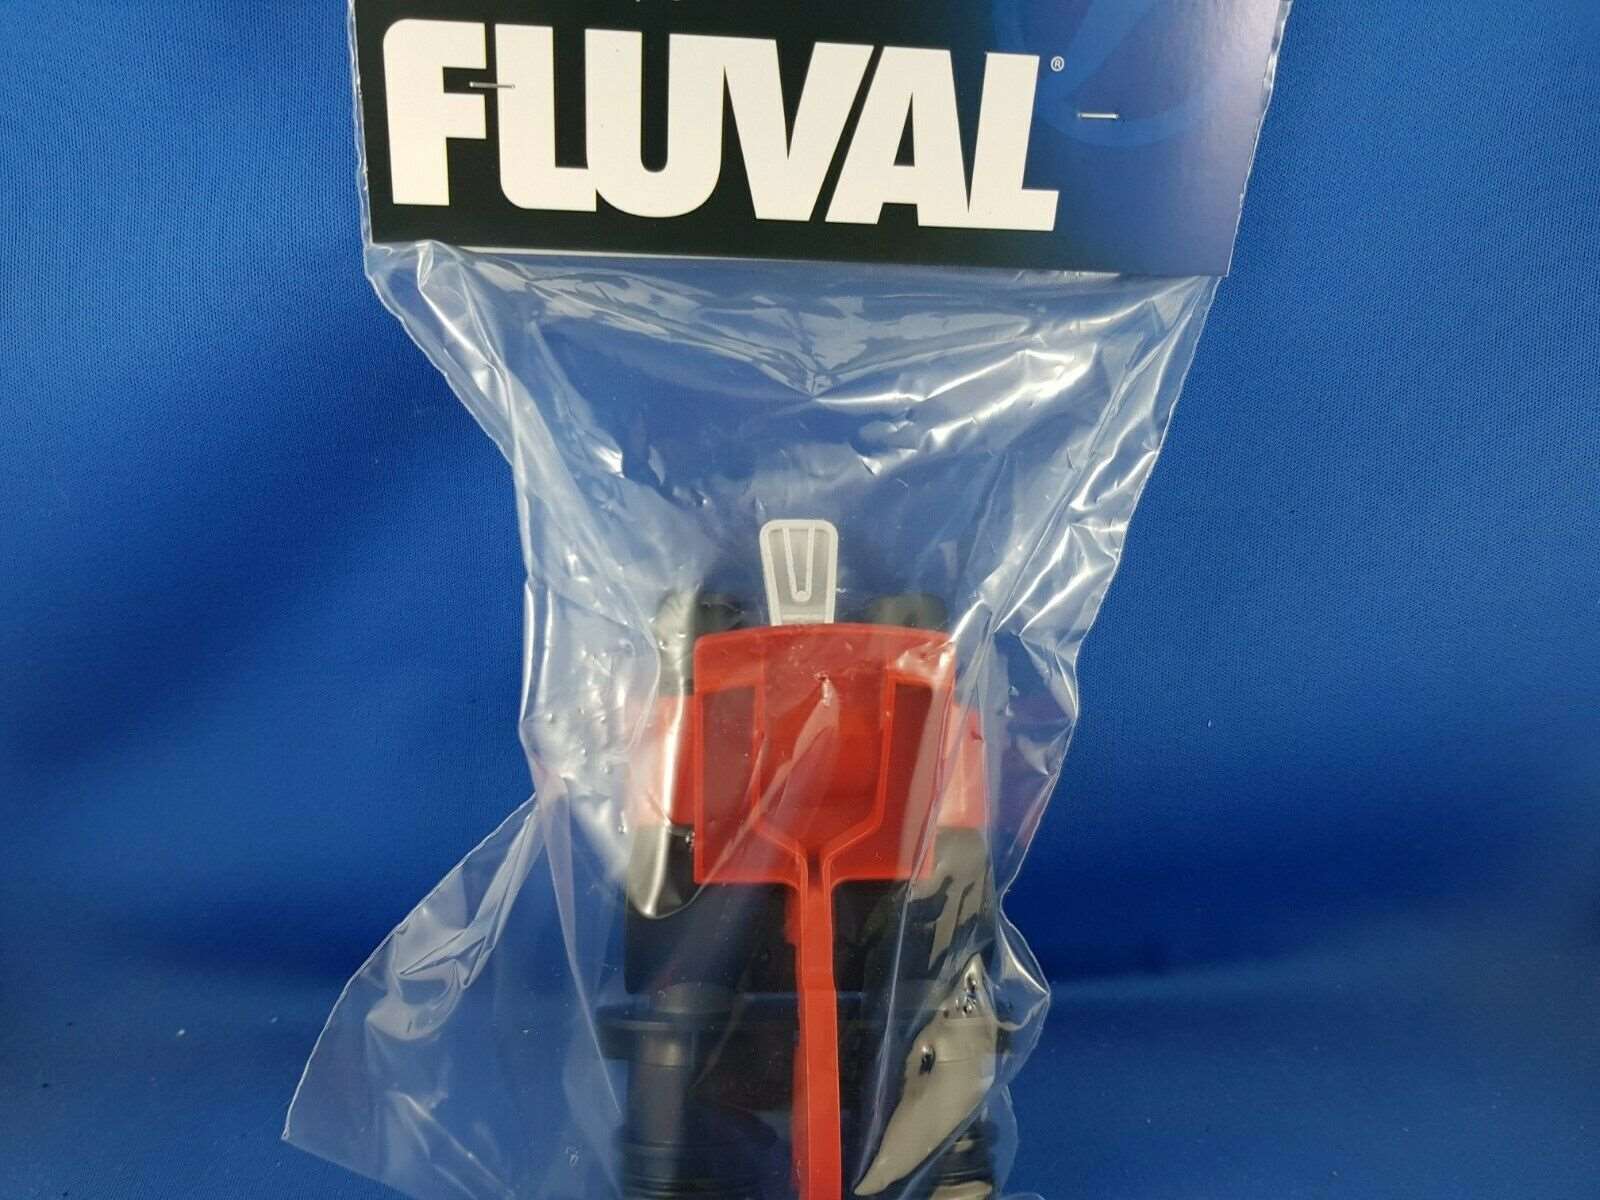 New Fluval Aqua Stop valve to suit most model Fluval power filters